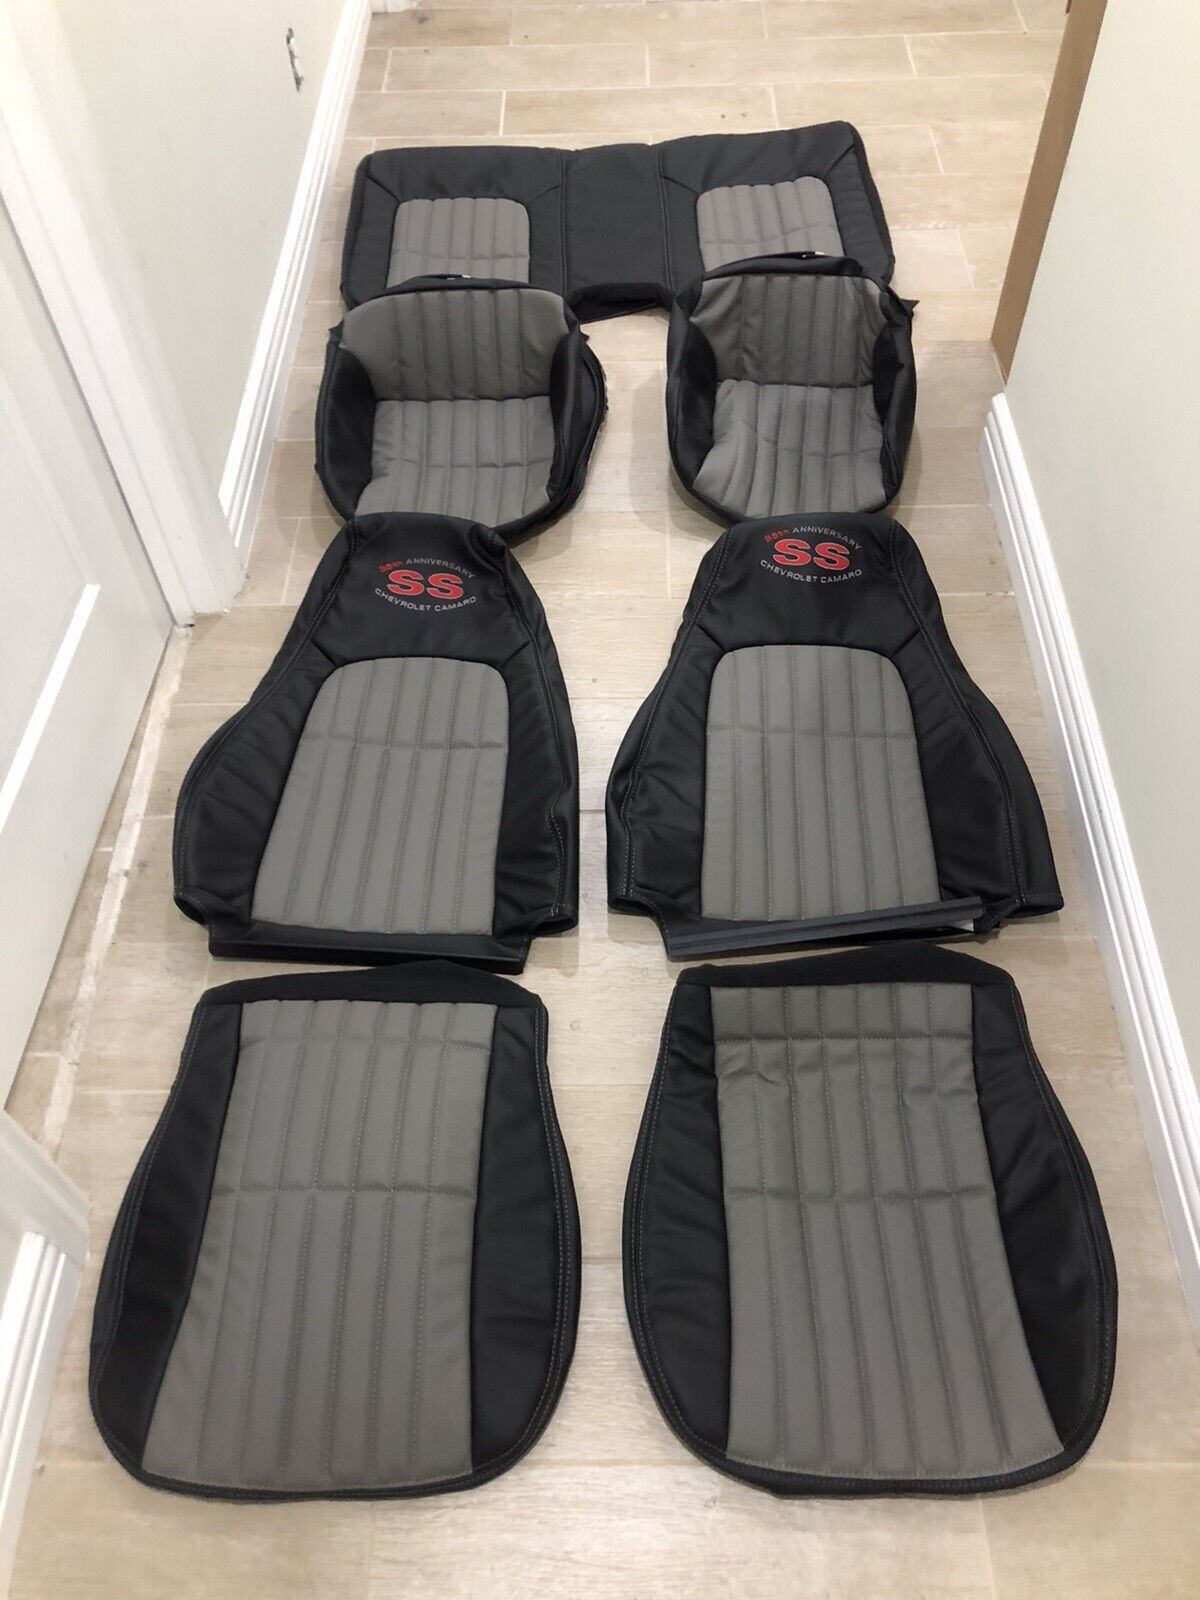 35th Anniversary Camaro SS LEATHER SSEAT Covers Black W/Pewter inserts IN STOCk